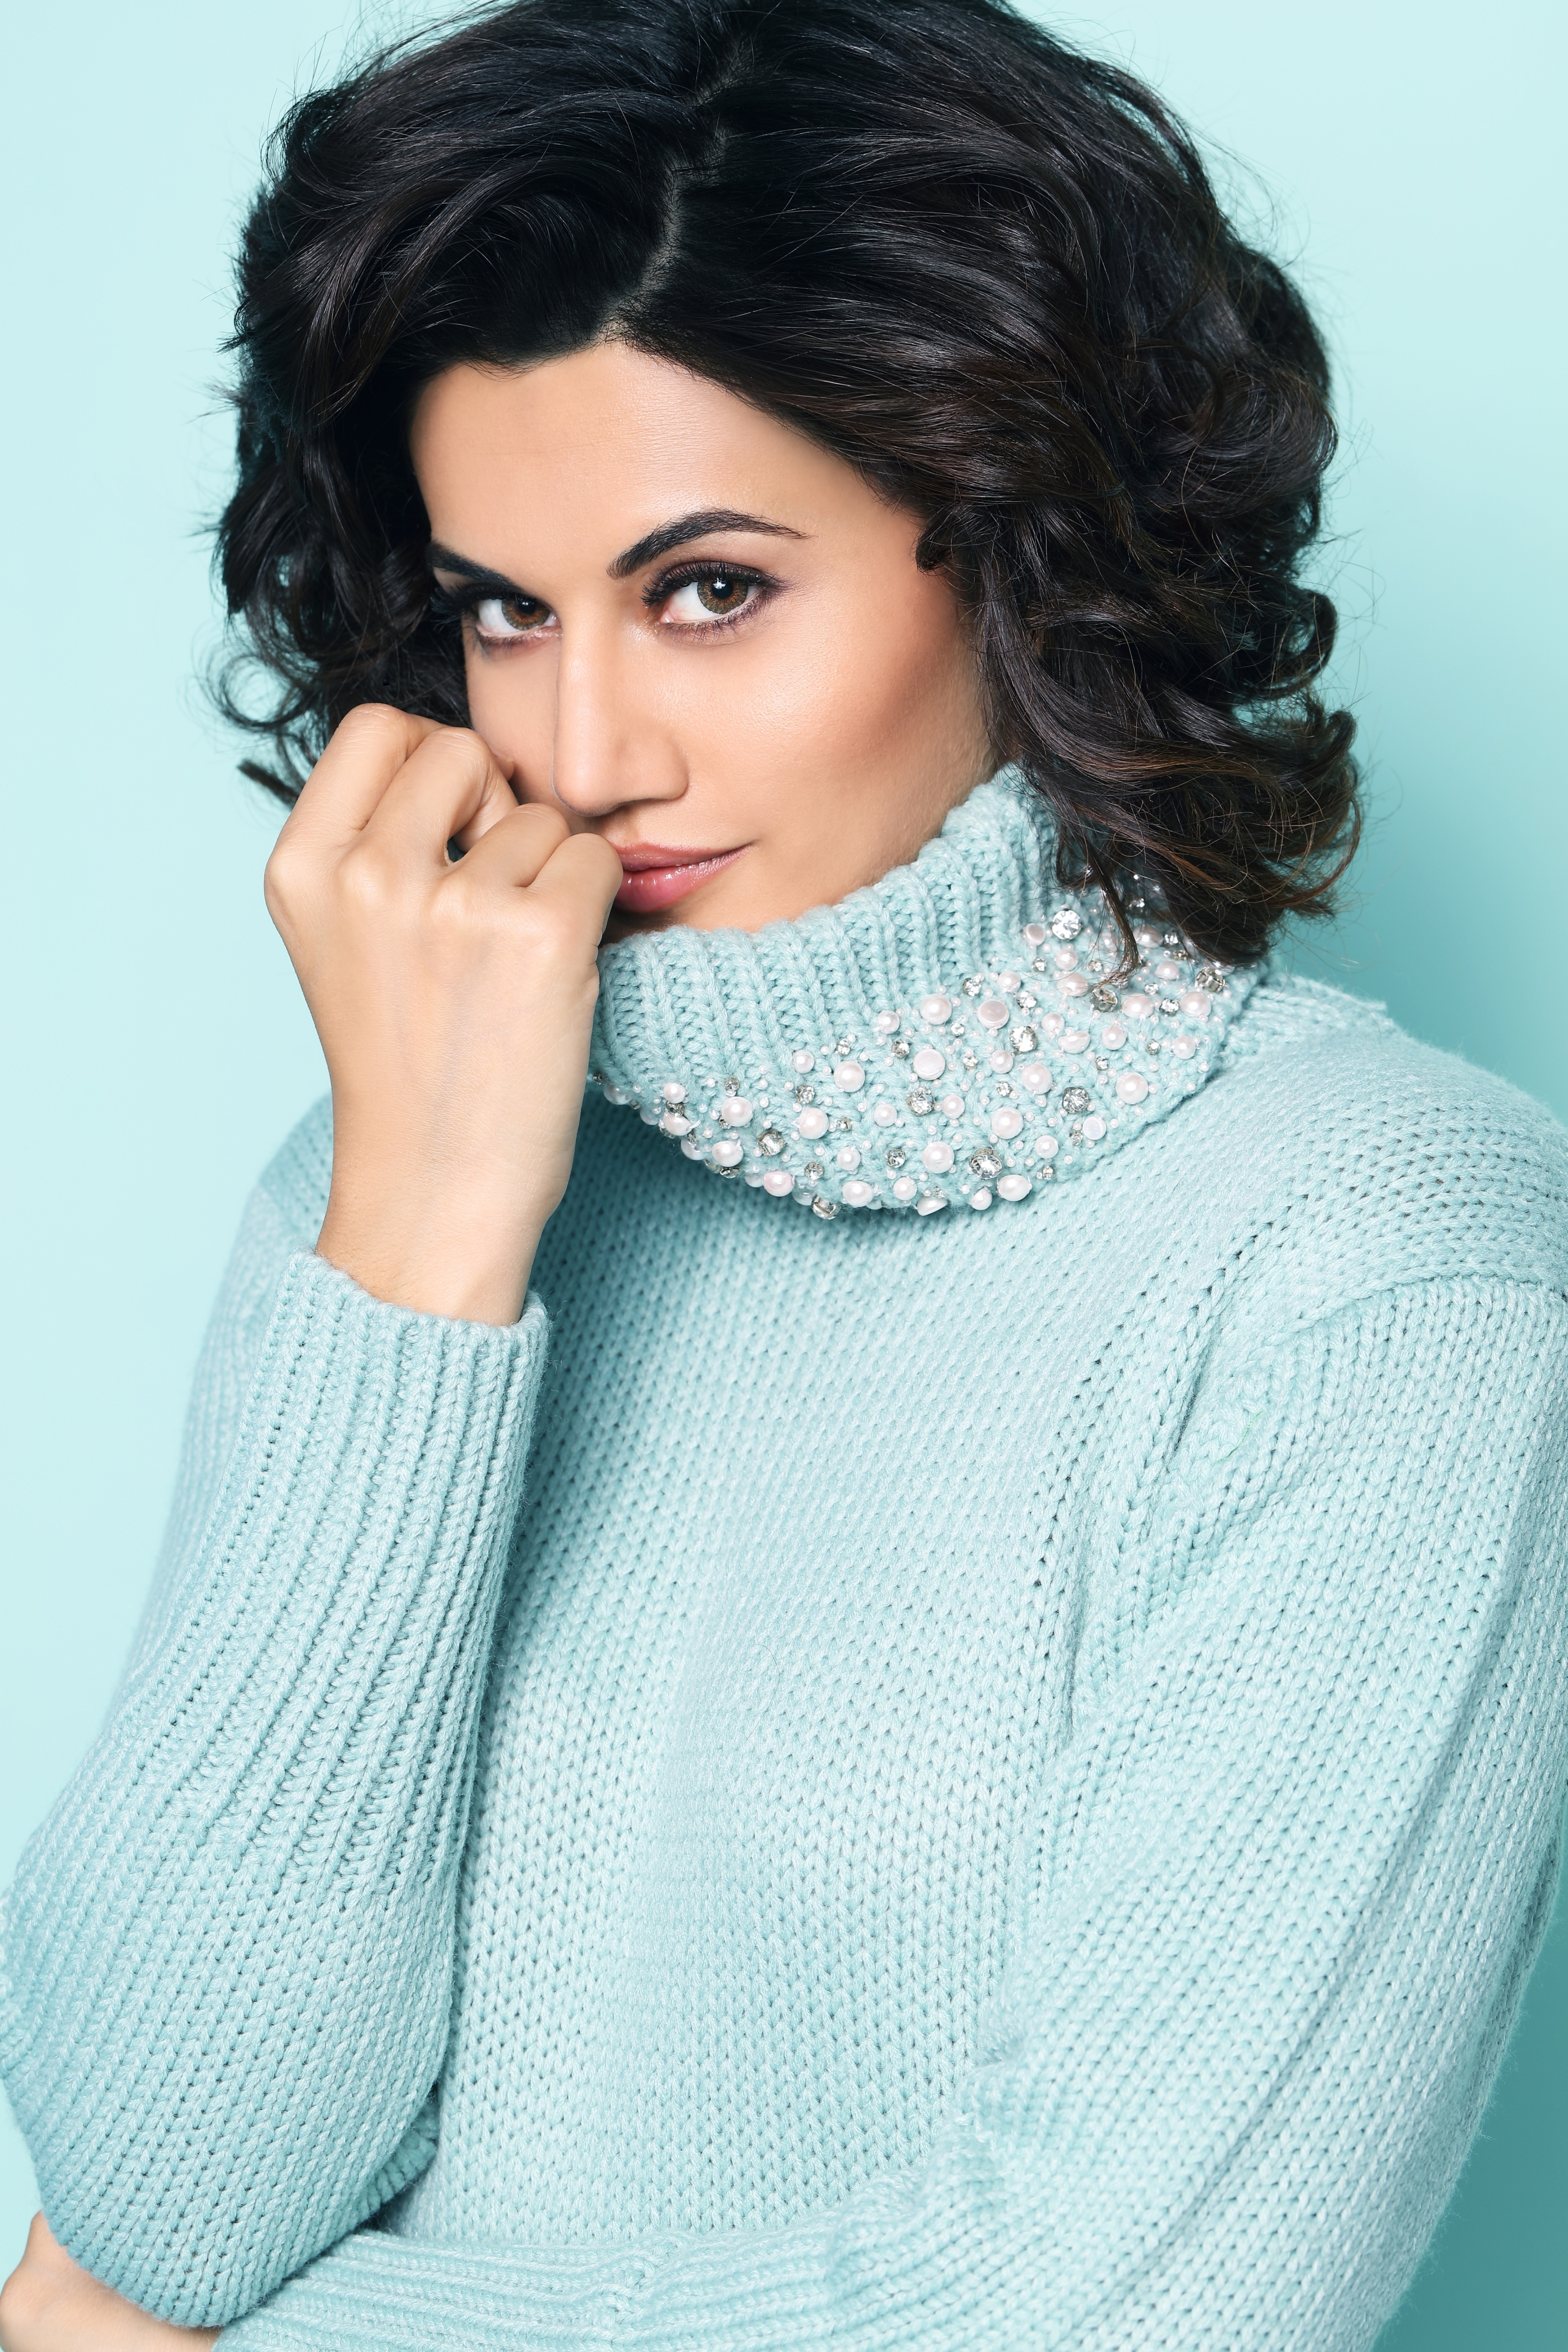 Taapsee Pannu, father, hockey player